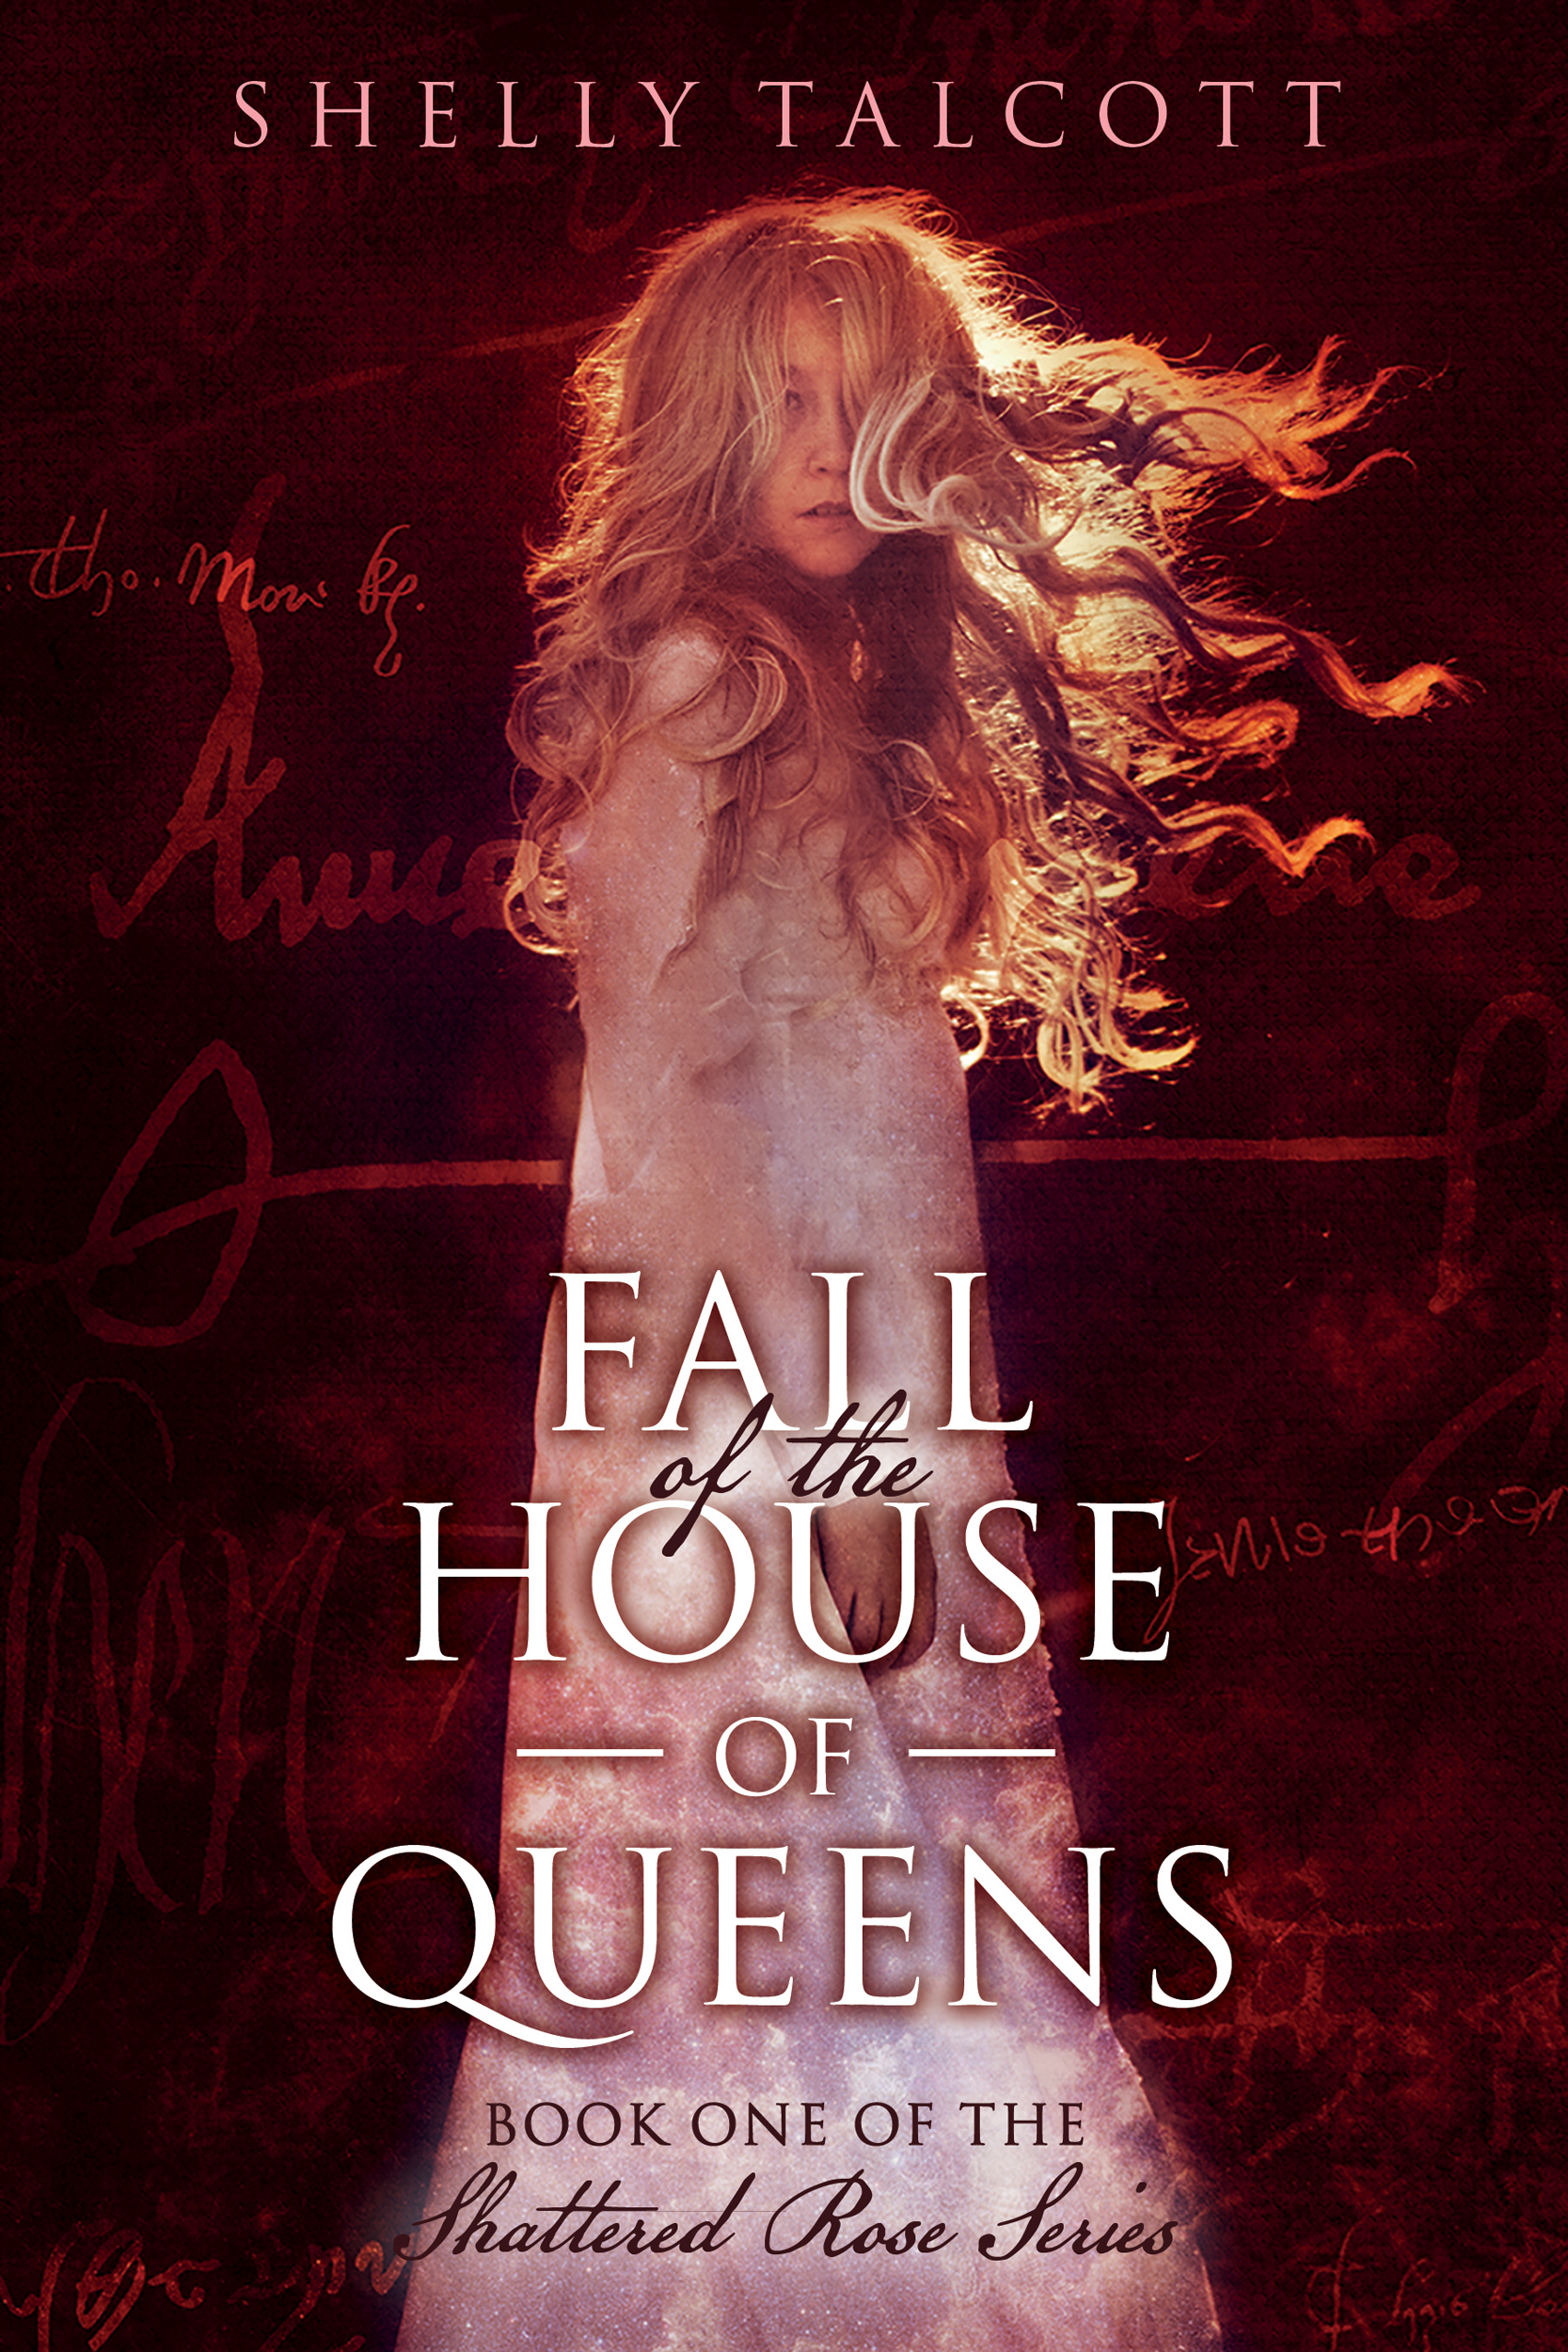 FREE: Fall of the House of Queens by Shelly Talcott by Shelly Talcott